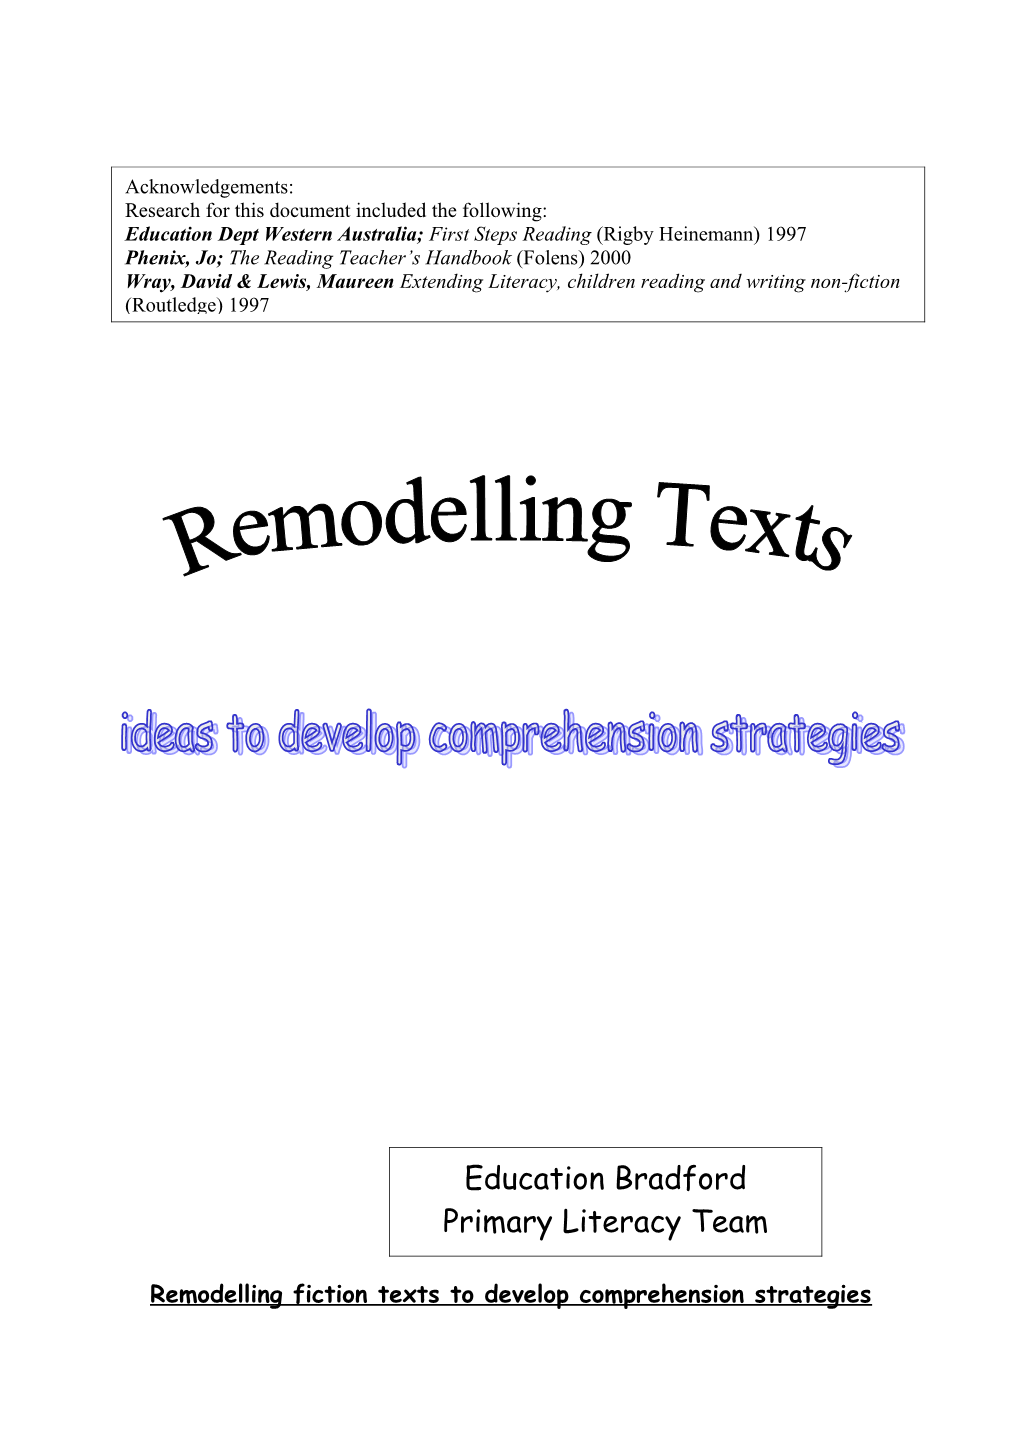 Remodelling Texts to Develop Comprehension Strategies